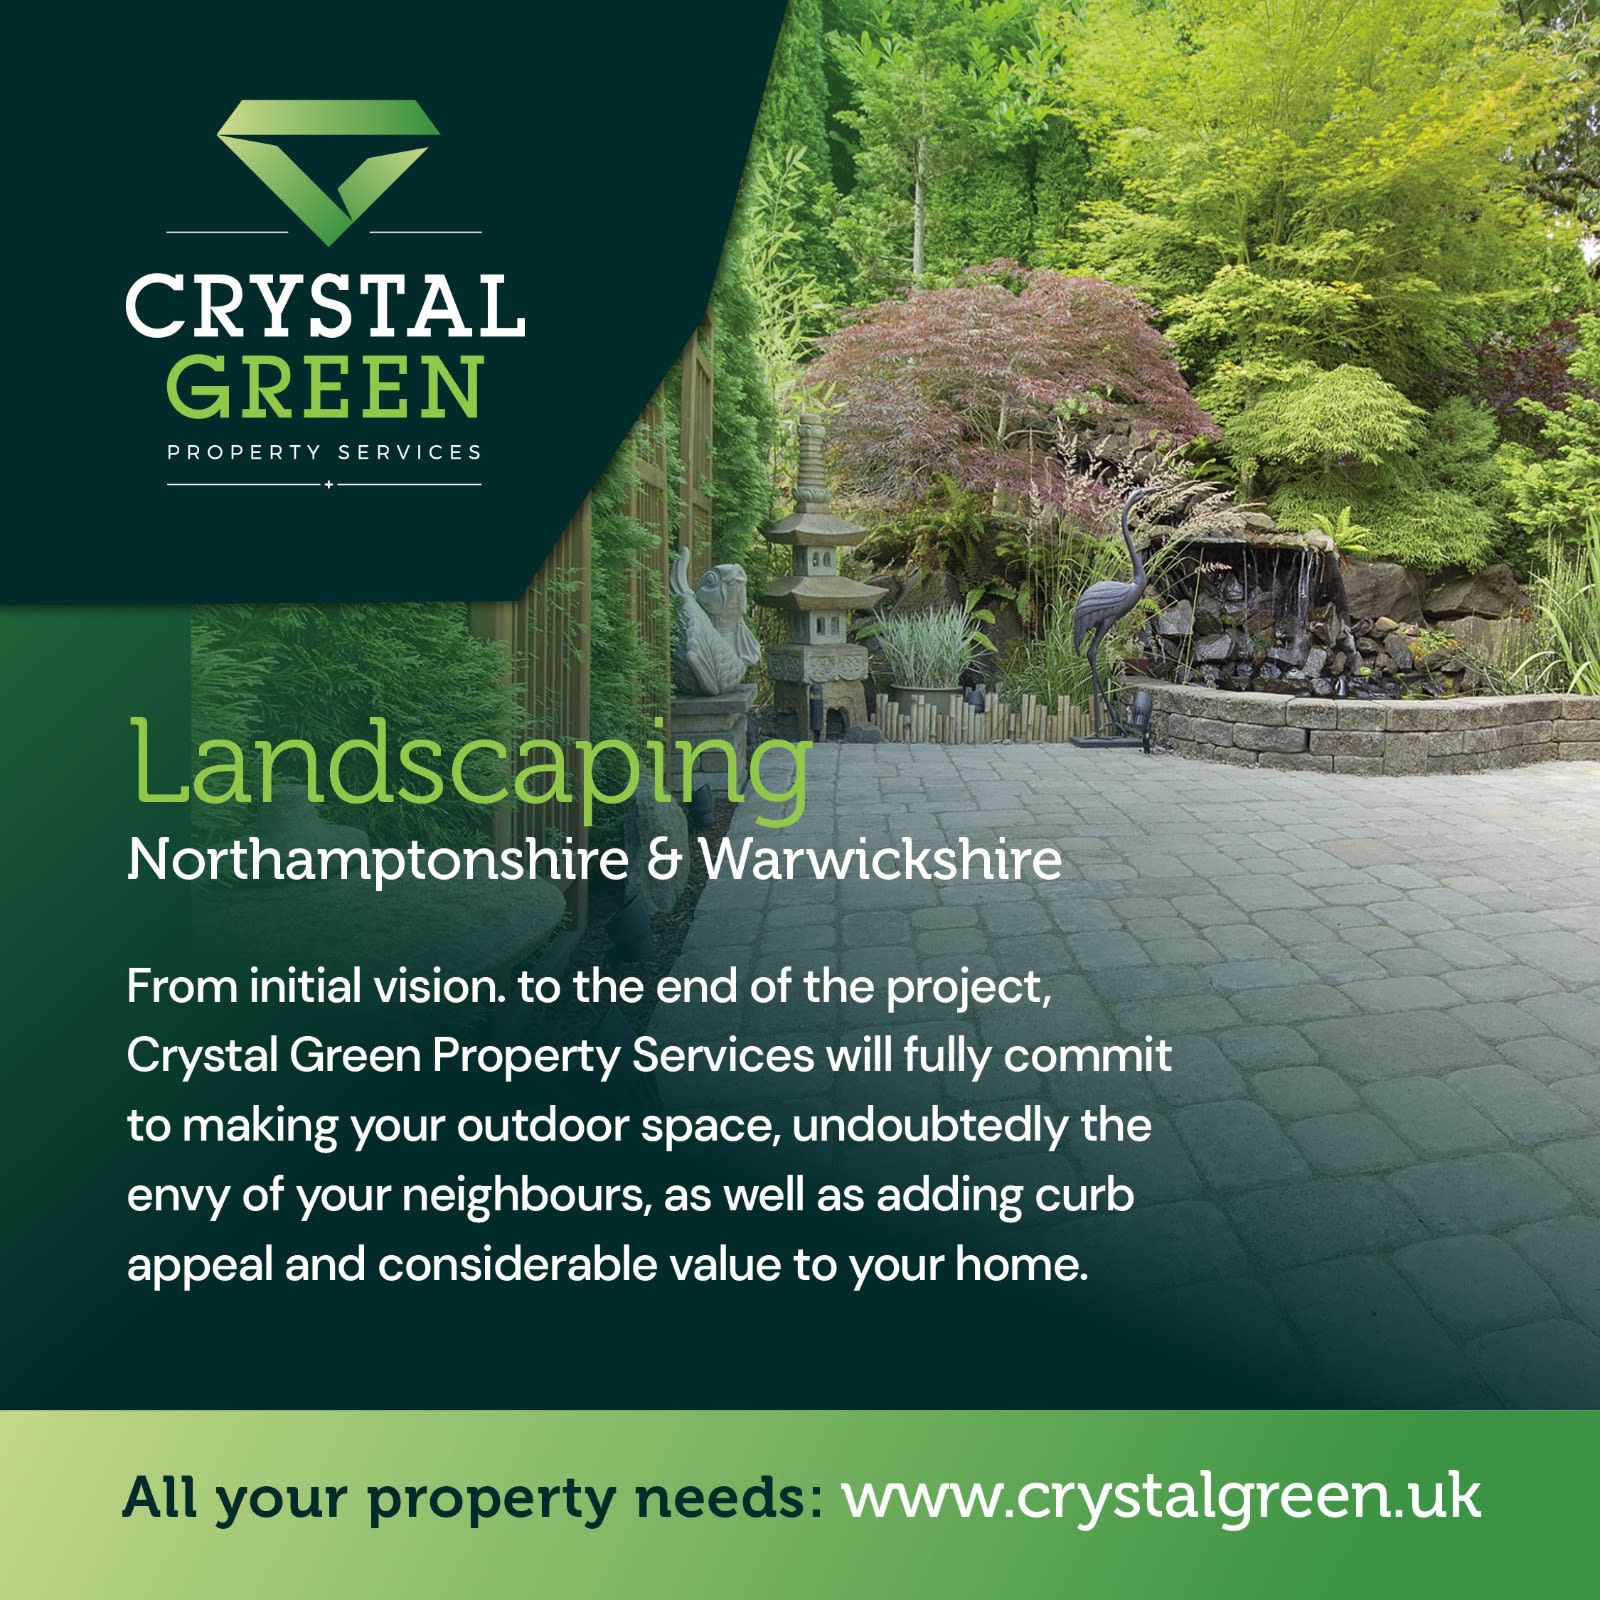 Crystal Green Property Services Ltd Daventry 07512 851560